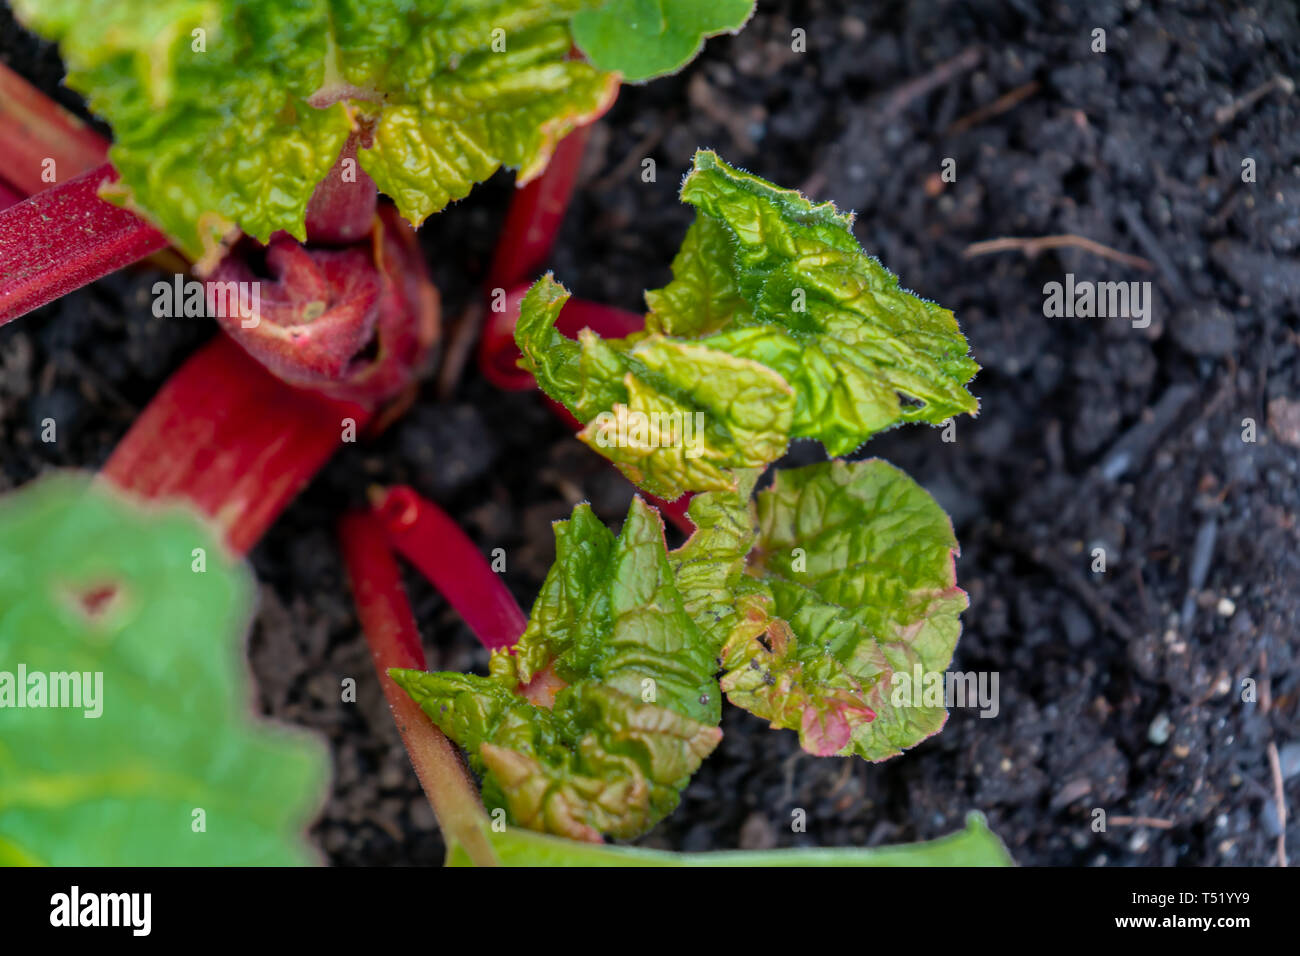 Red rhubarb crown growing stalks in early spring, with new leaves. Leaves contain oxalic acid. Stock Photo